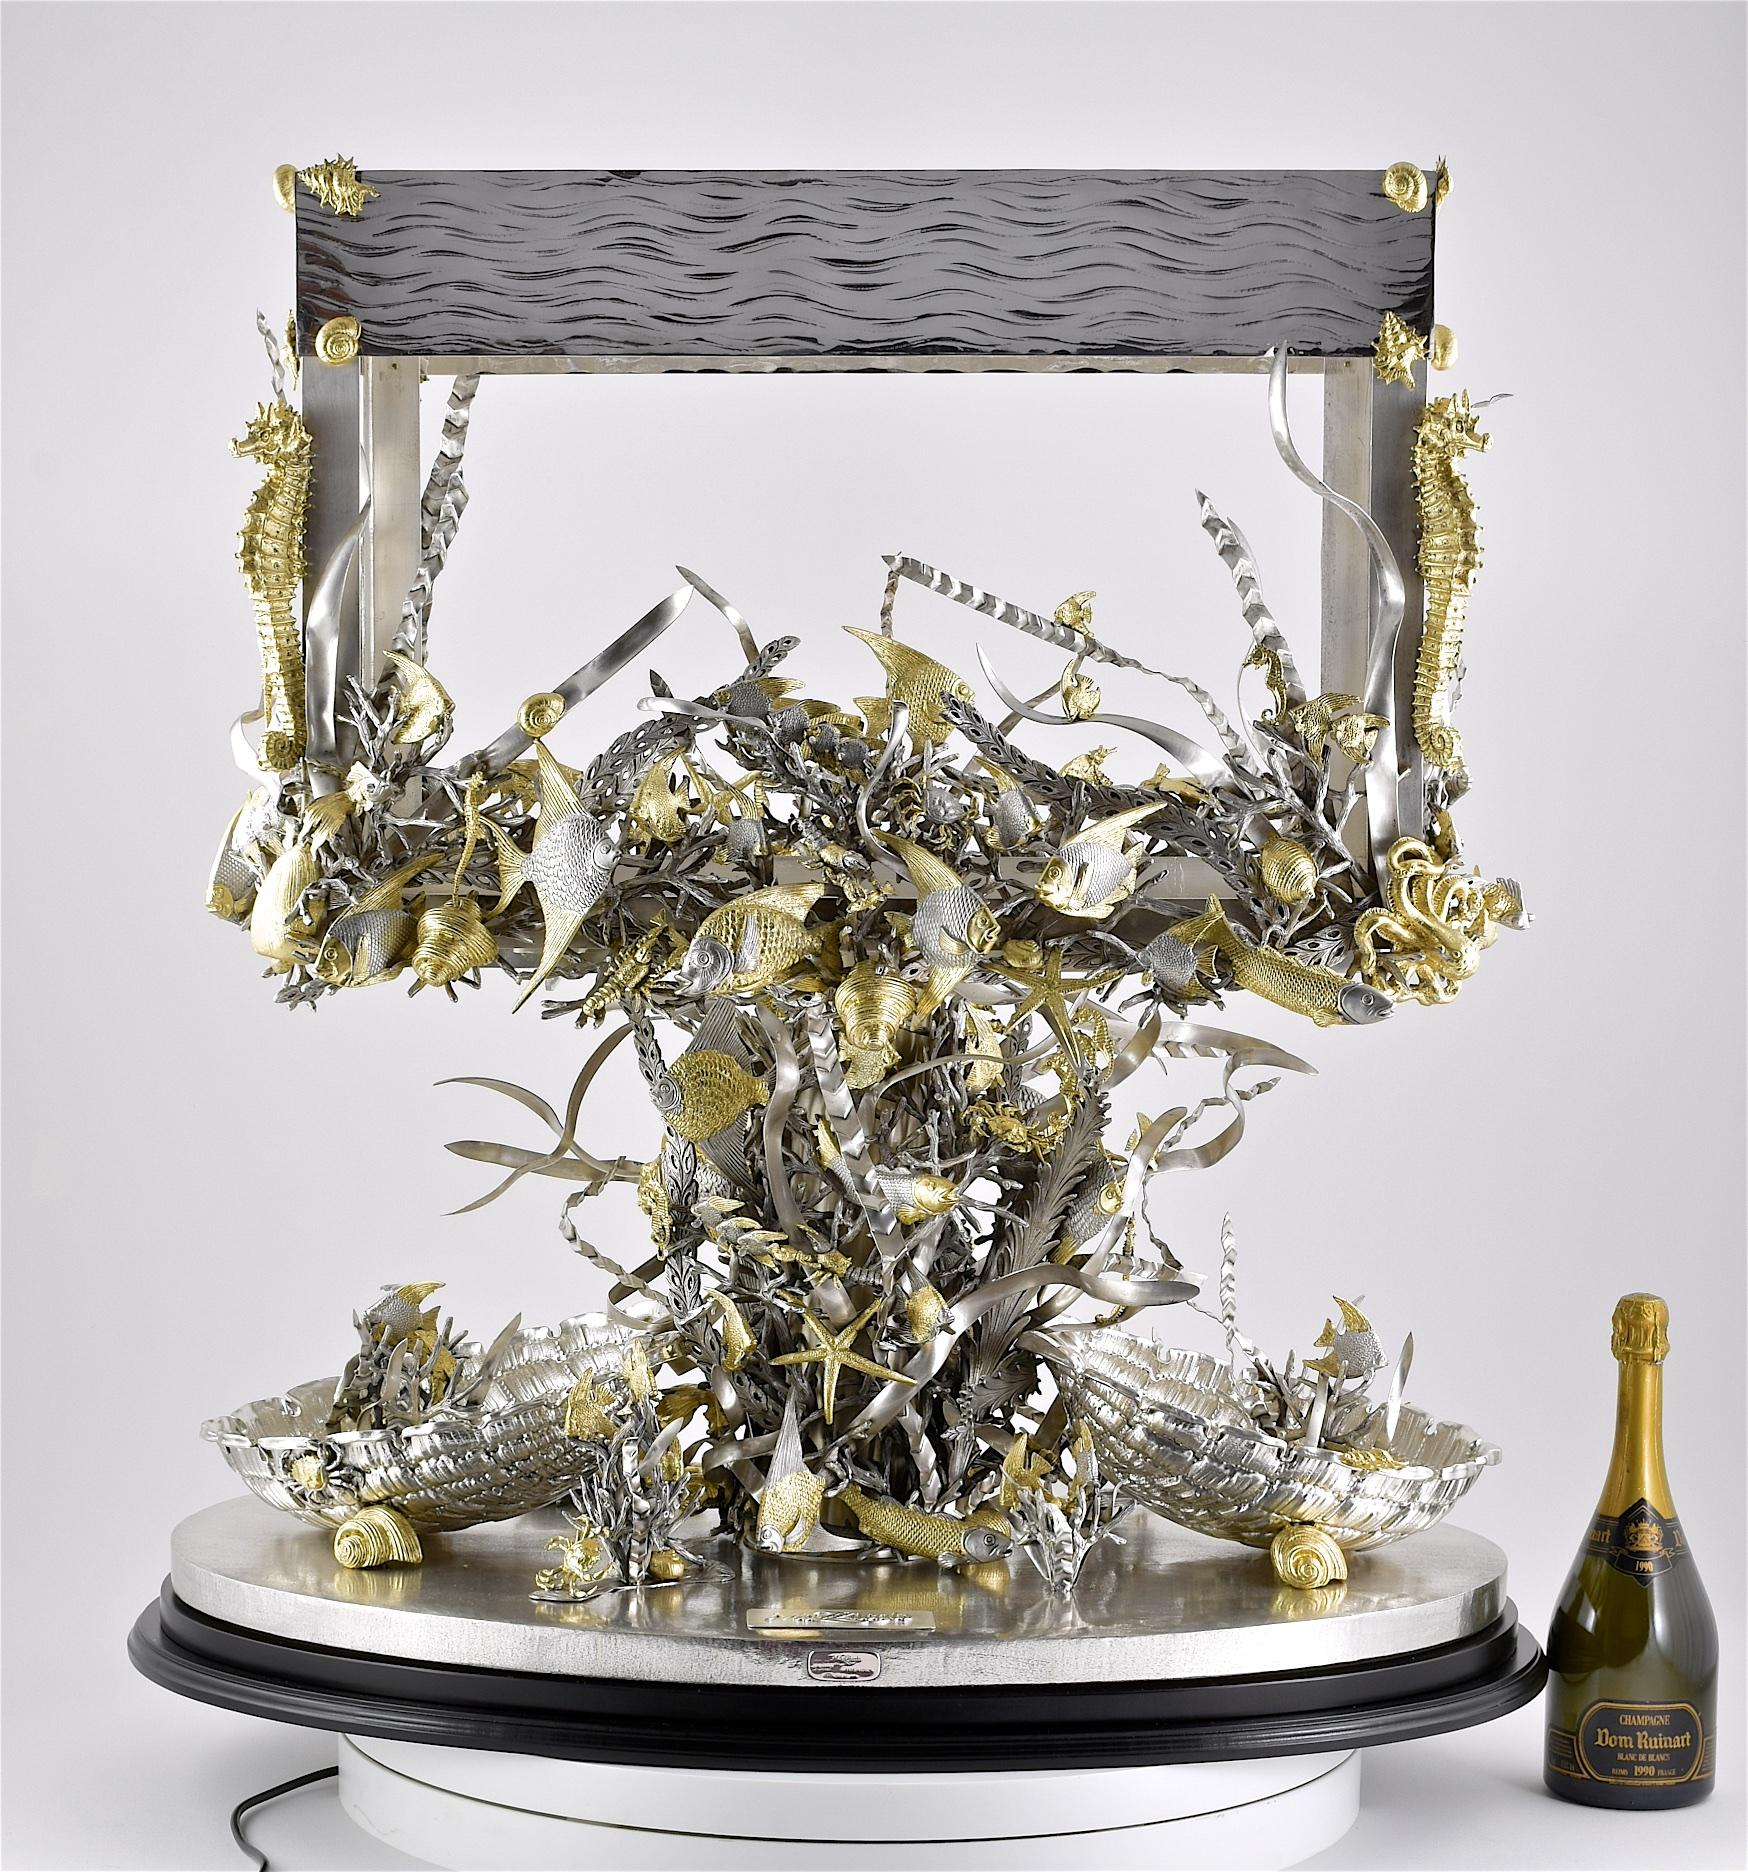 Unlike any piece that we have ever offered before, this monumental & heavy quality sterling silver aquarium is formed with an oval base mounted with two silver half-shells mounted with fish sea-foliage and crustaceans and fish, the central column